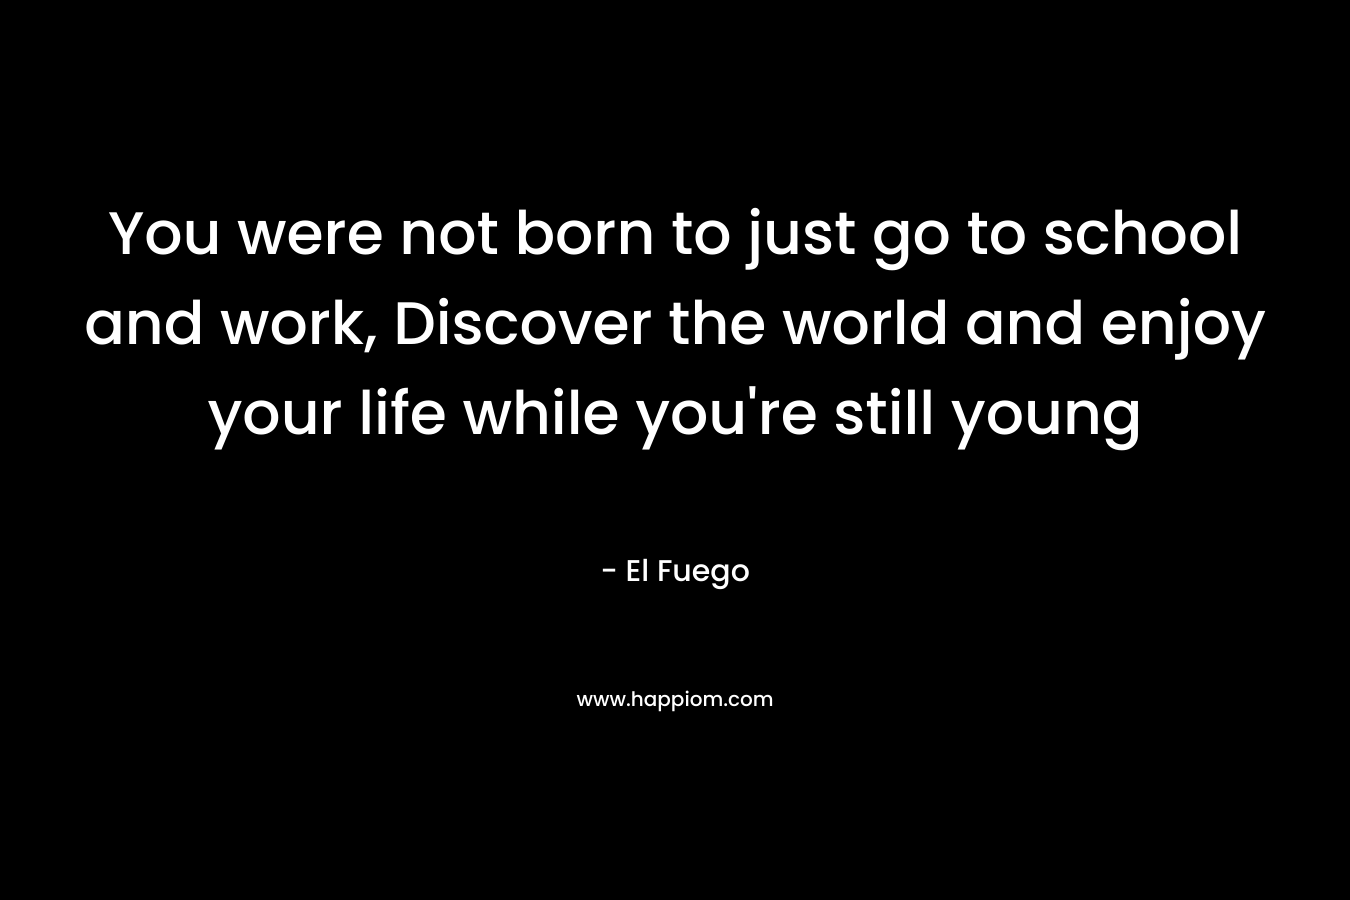 You were not born to just go to school and work, Discover the world and enjoy your life while you’re still young – El Fuego